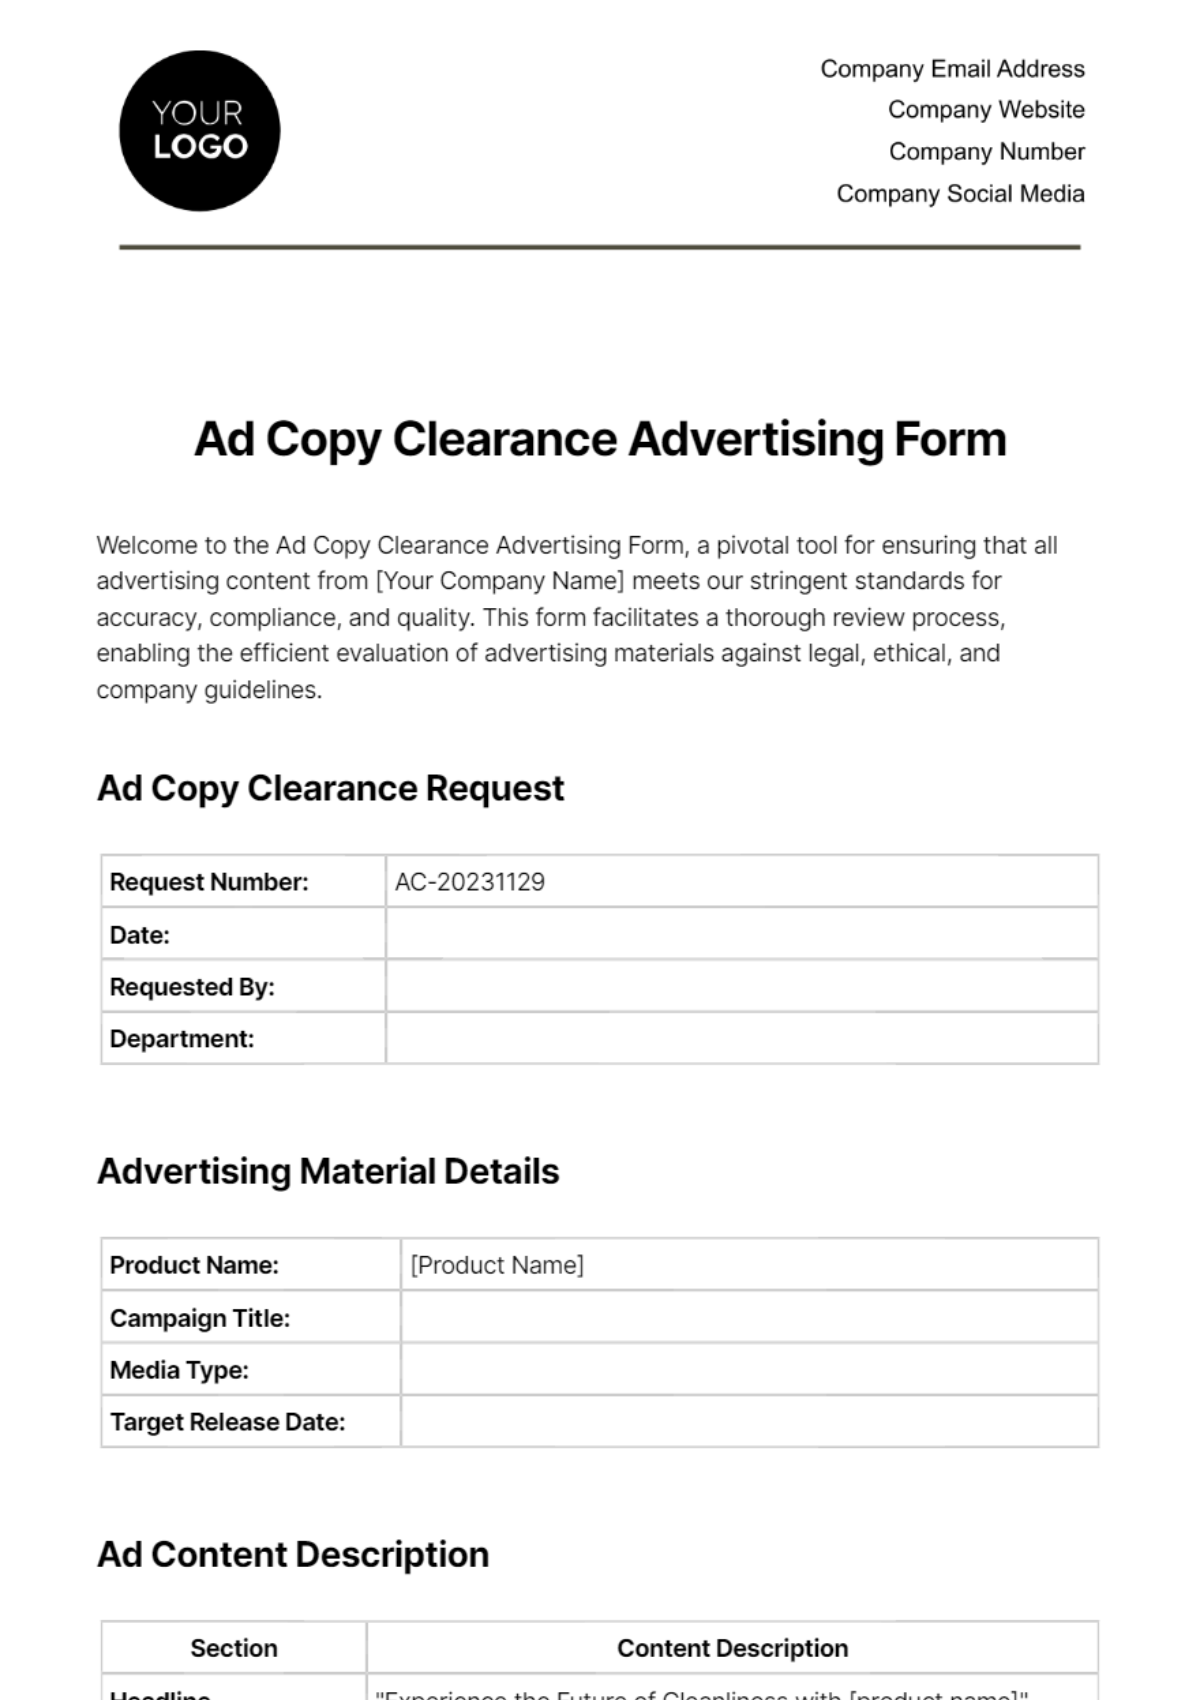 Ad Copy Clearance Advertising Form Template